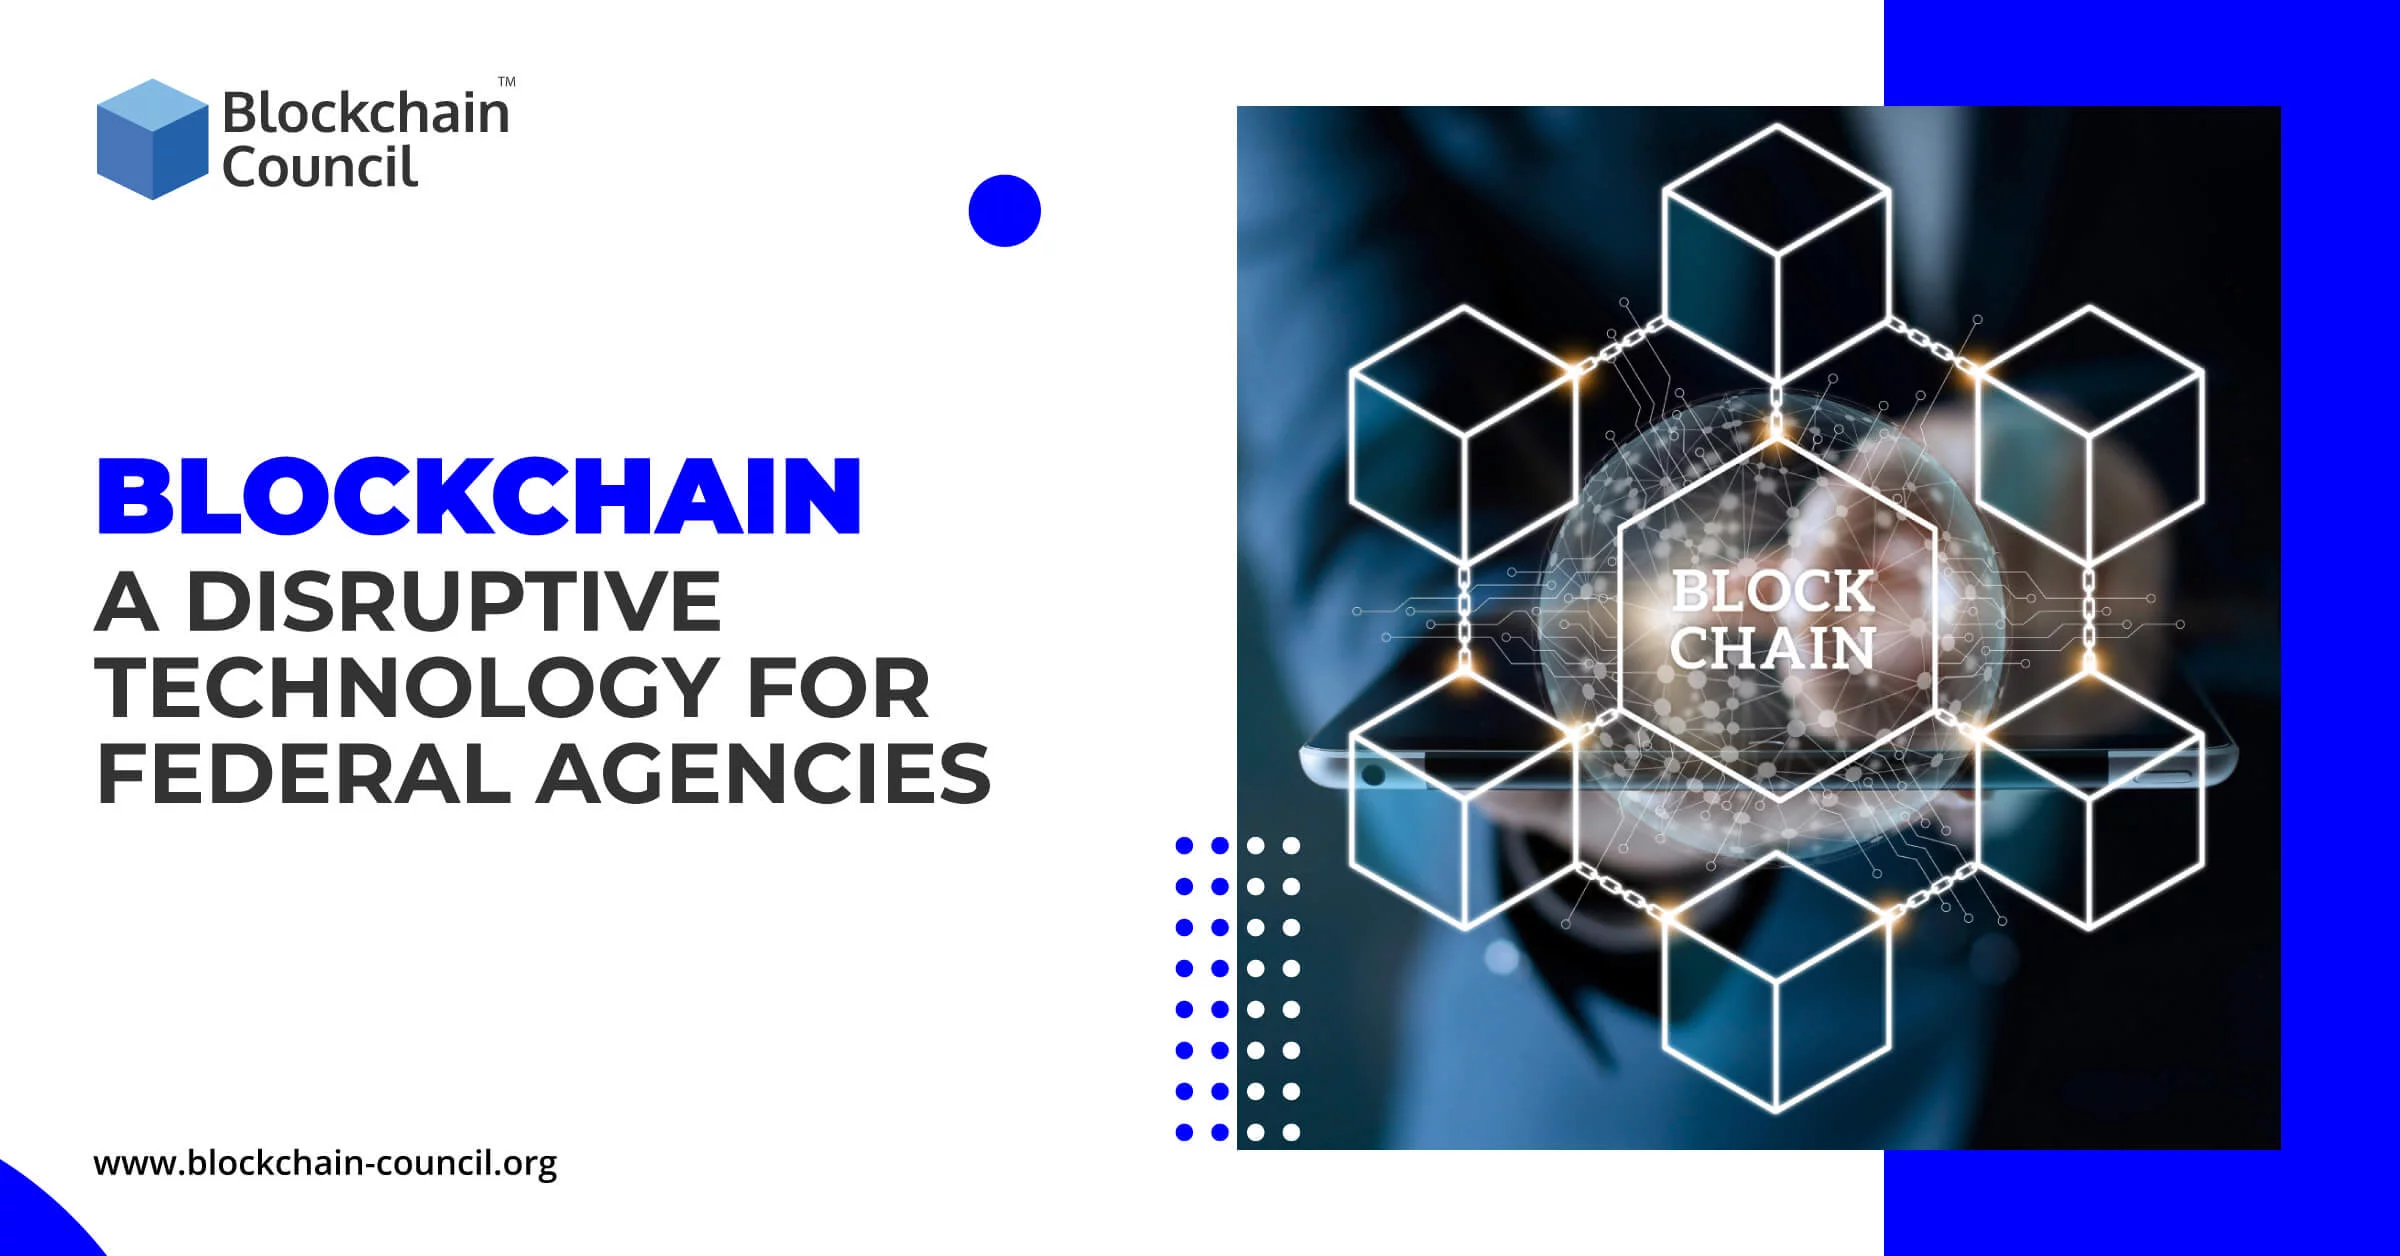 Blockchain: A Disruptive Technology for Federal Agencies